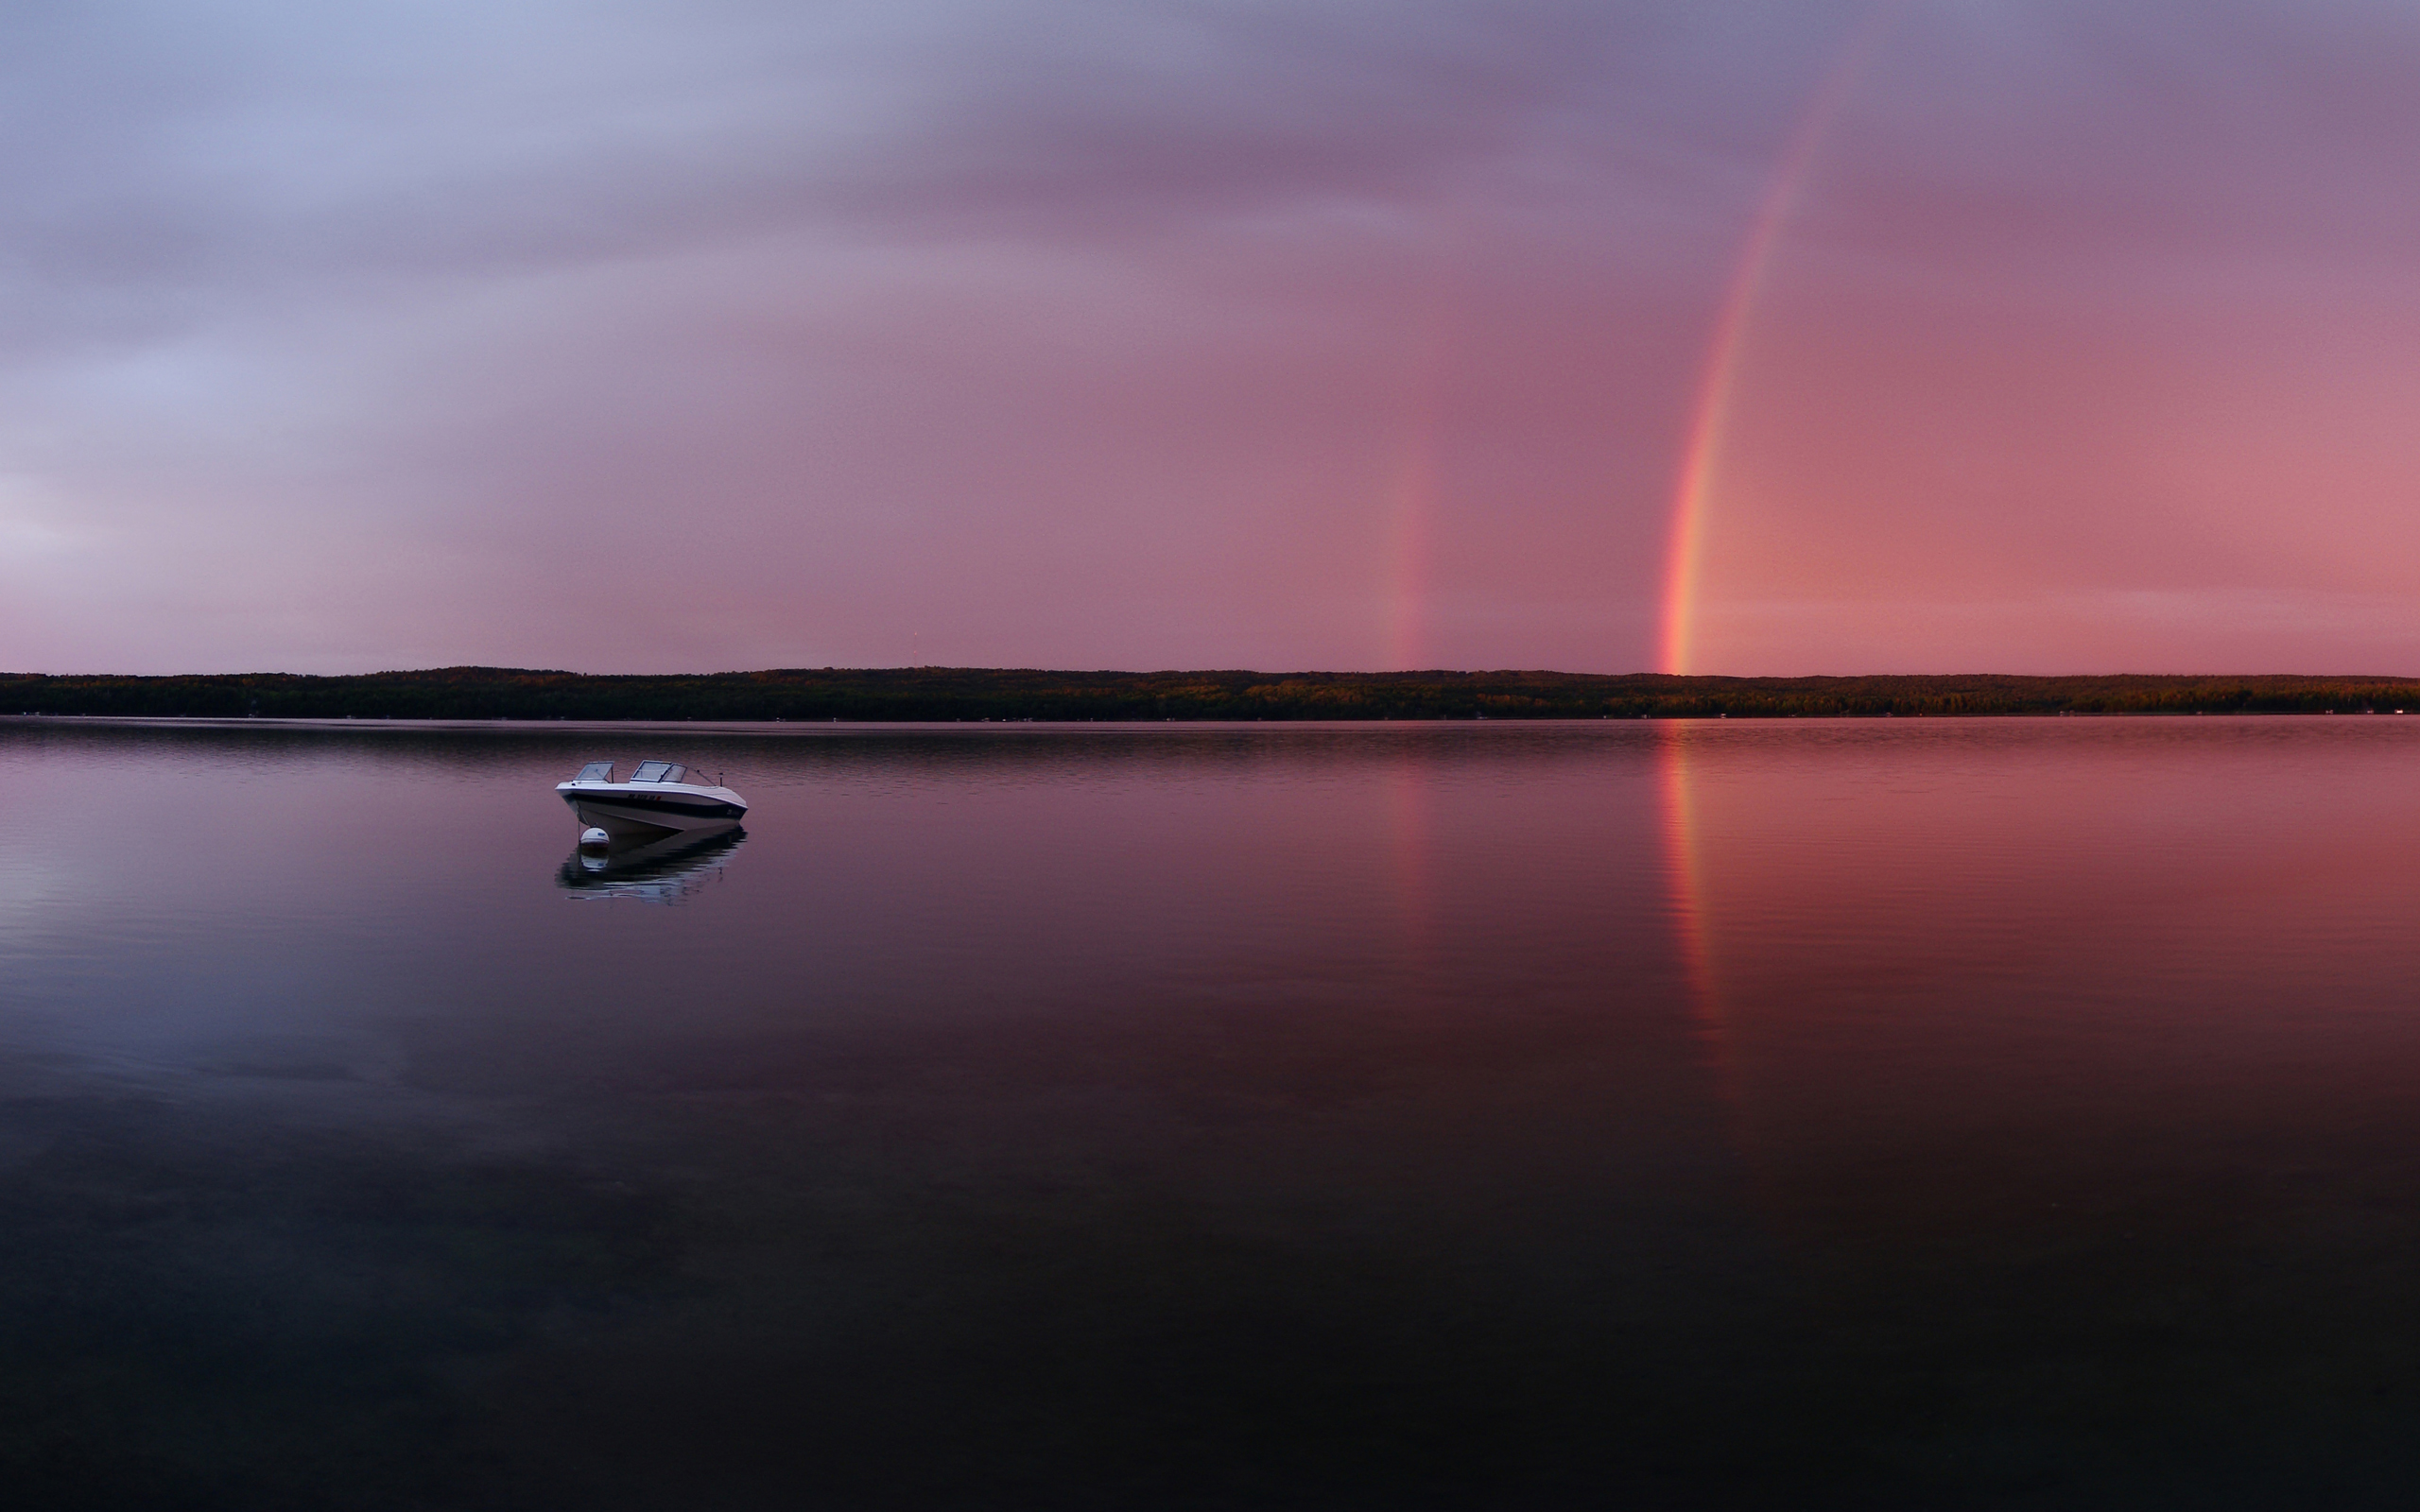 General 2560x1600 nature landscape water reflection boat rainbows lake horizon forest low light